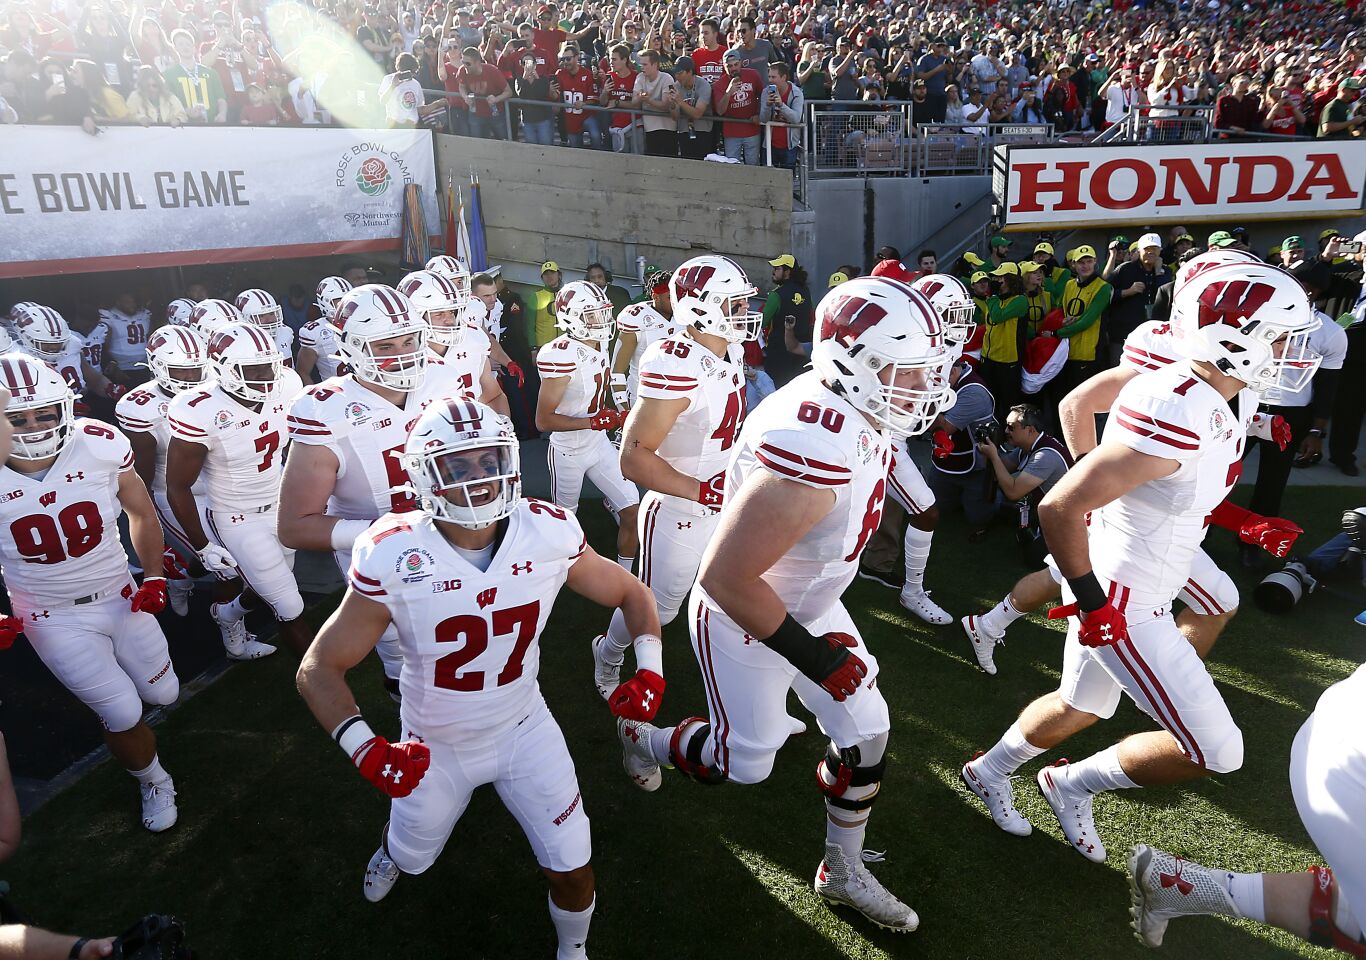 Wisconsin takes the field before the start of the Rose Bowl Game against Oregon.